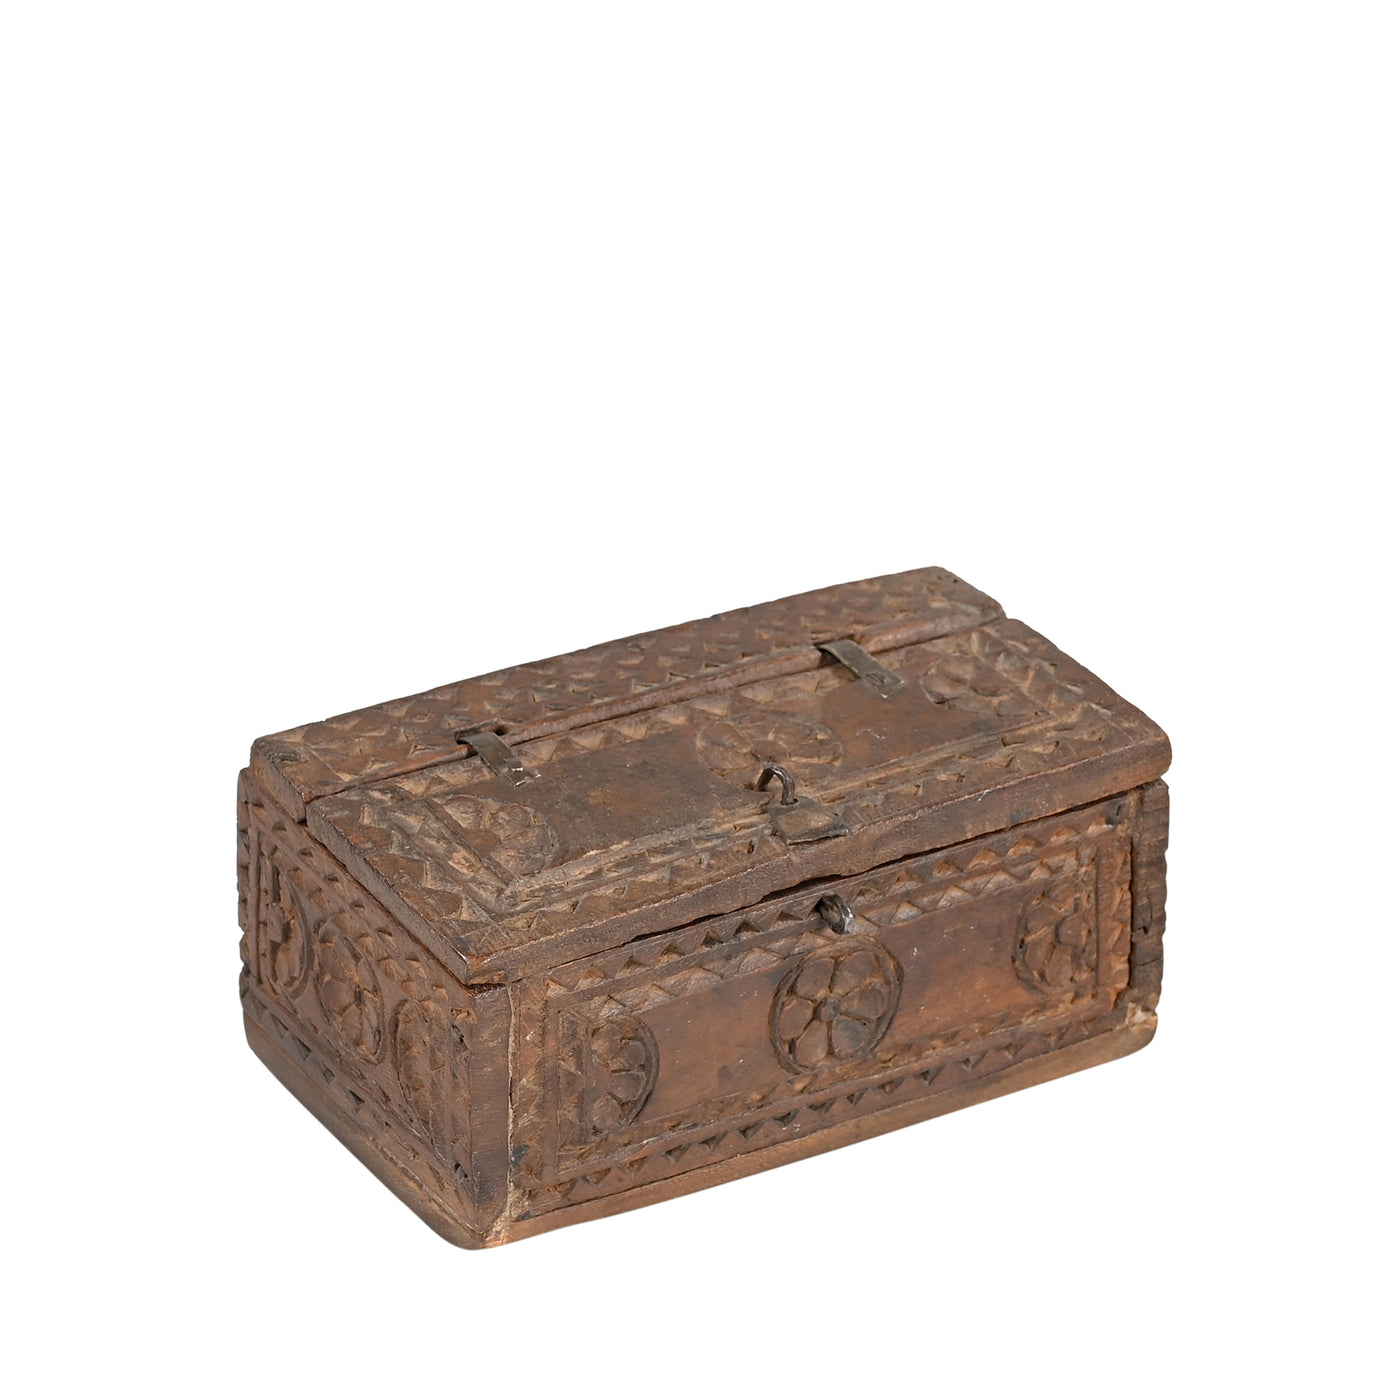 Diwandi - Small carved wooden chest